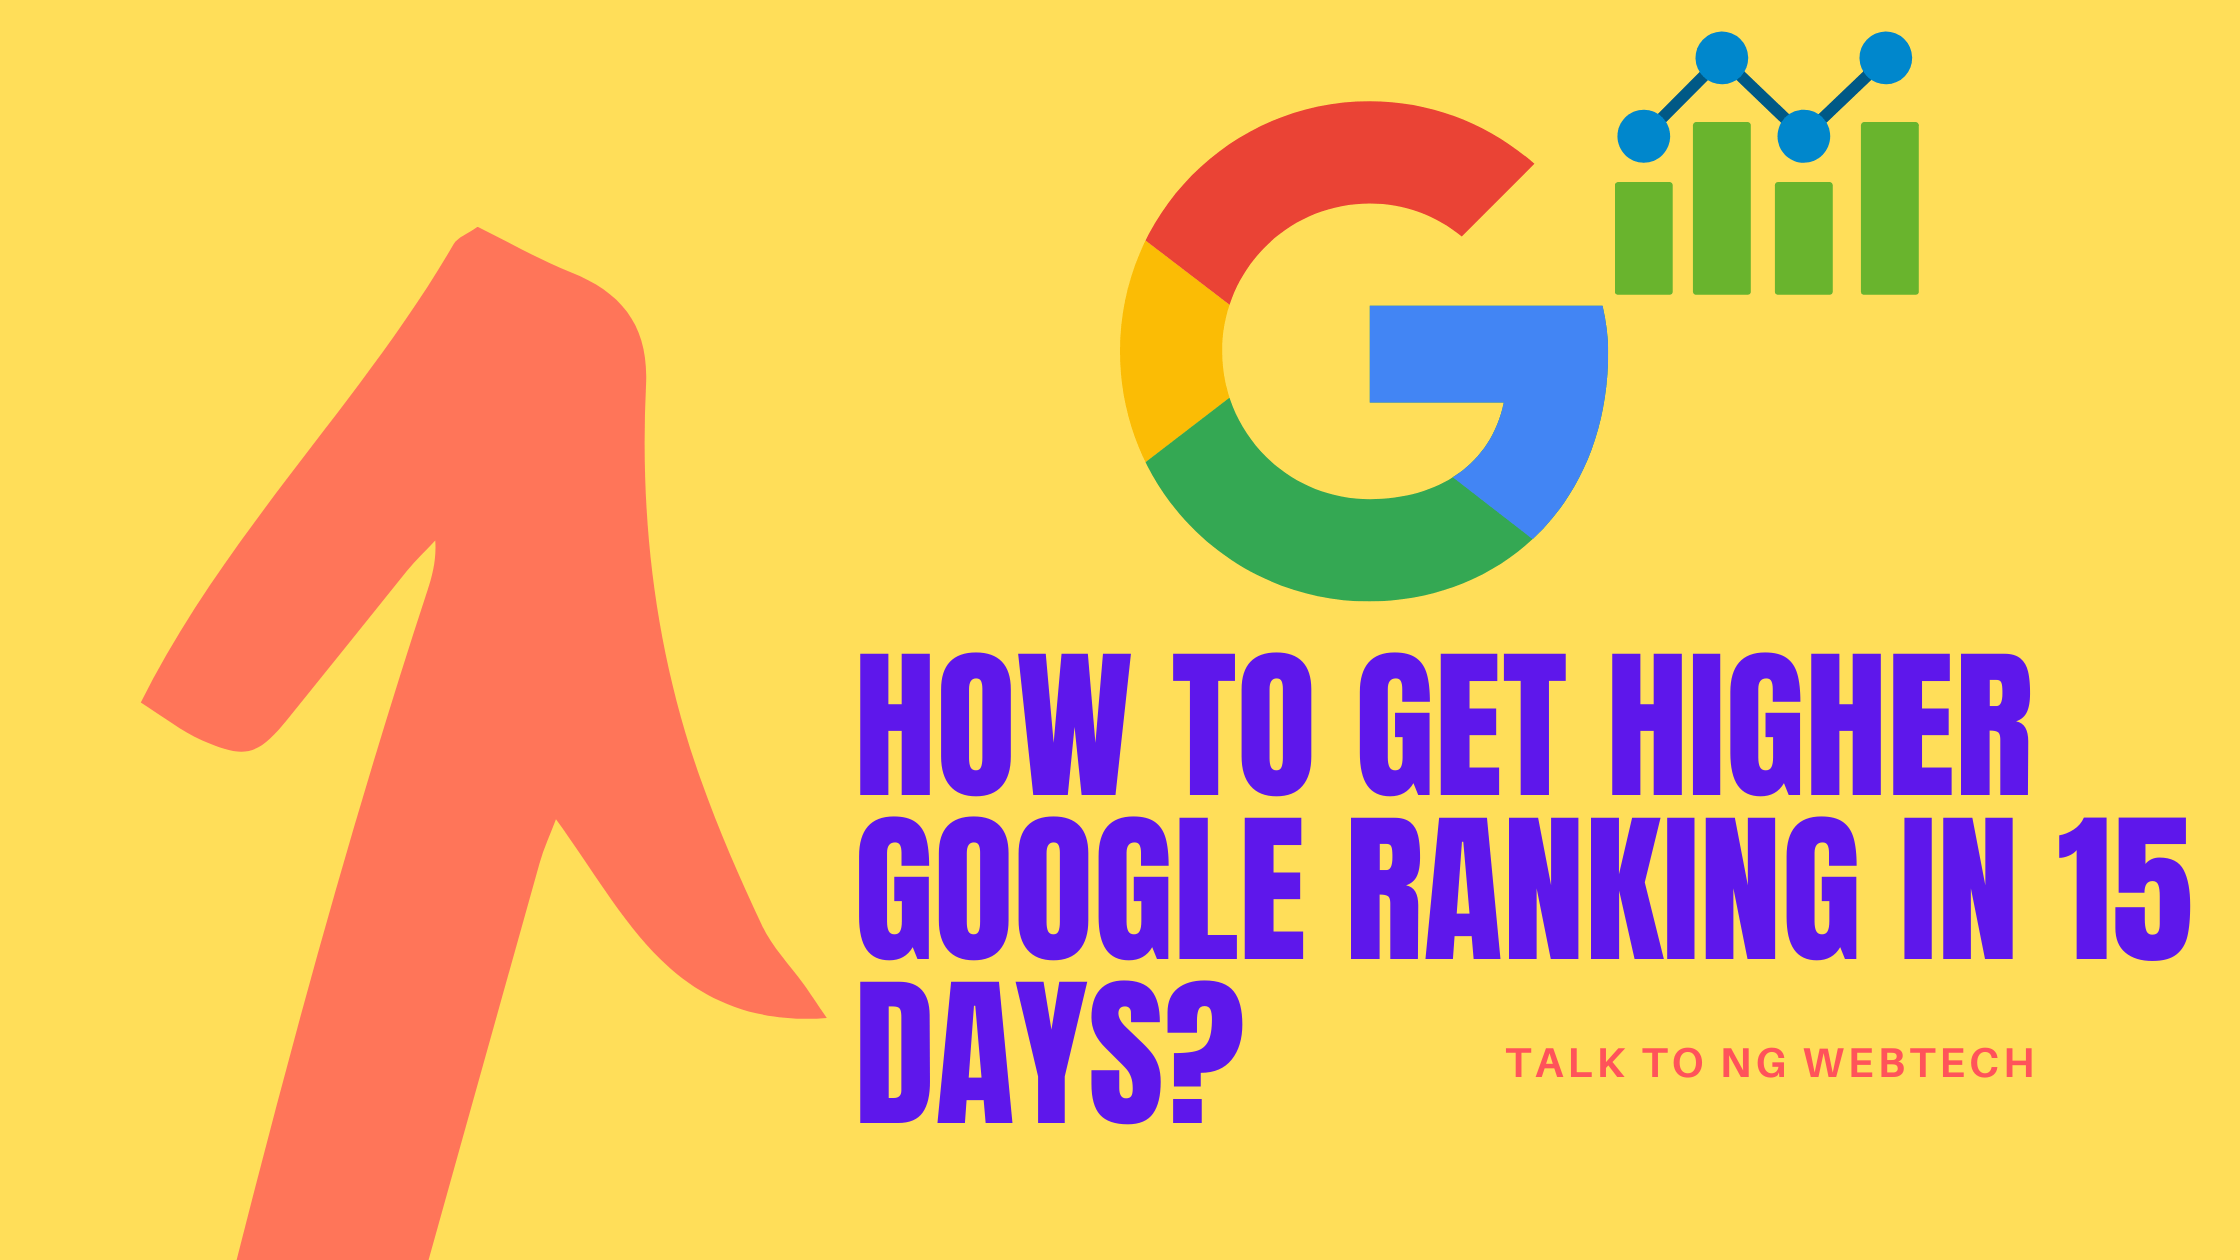 Google rankings in just 15 days